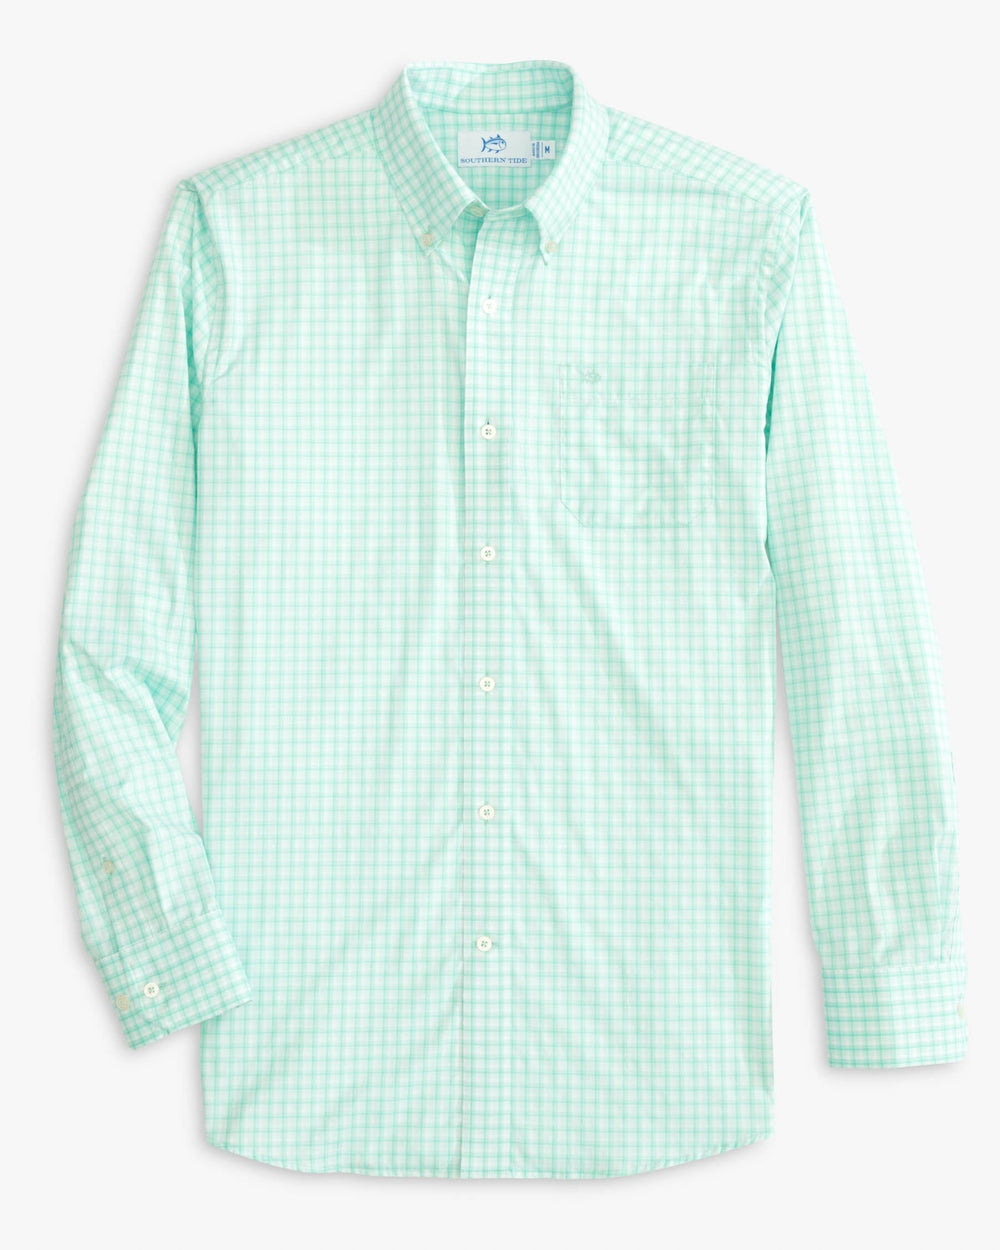 The front view of the Southern Tide brrr Skycrest Plaid Intercoastal Sport Shirt by Southern Tide - Baltic Teal